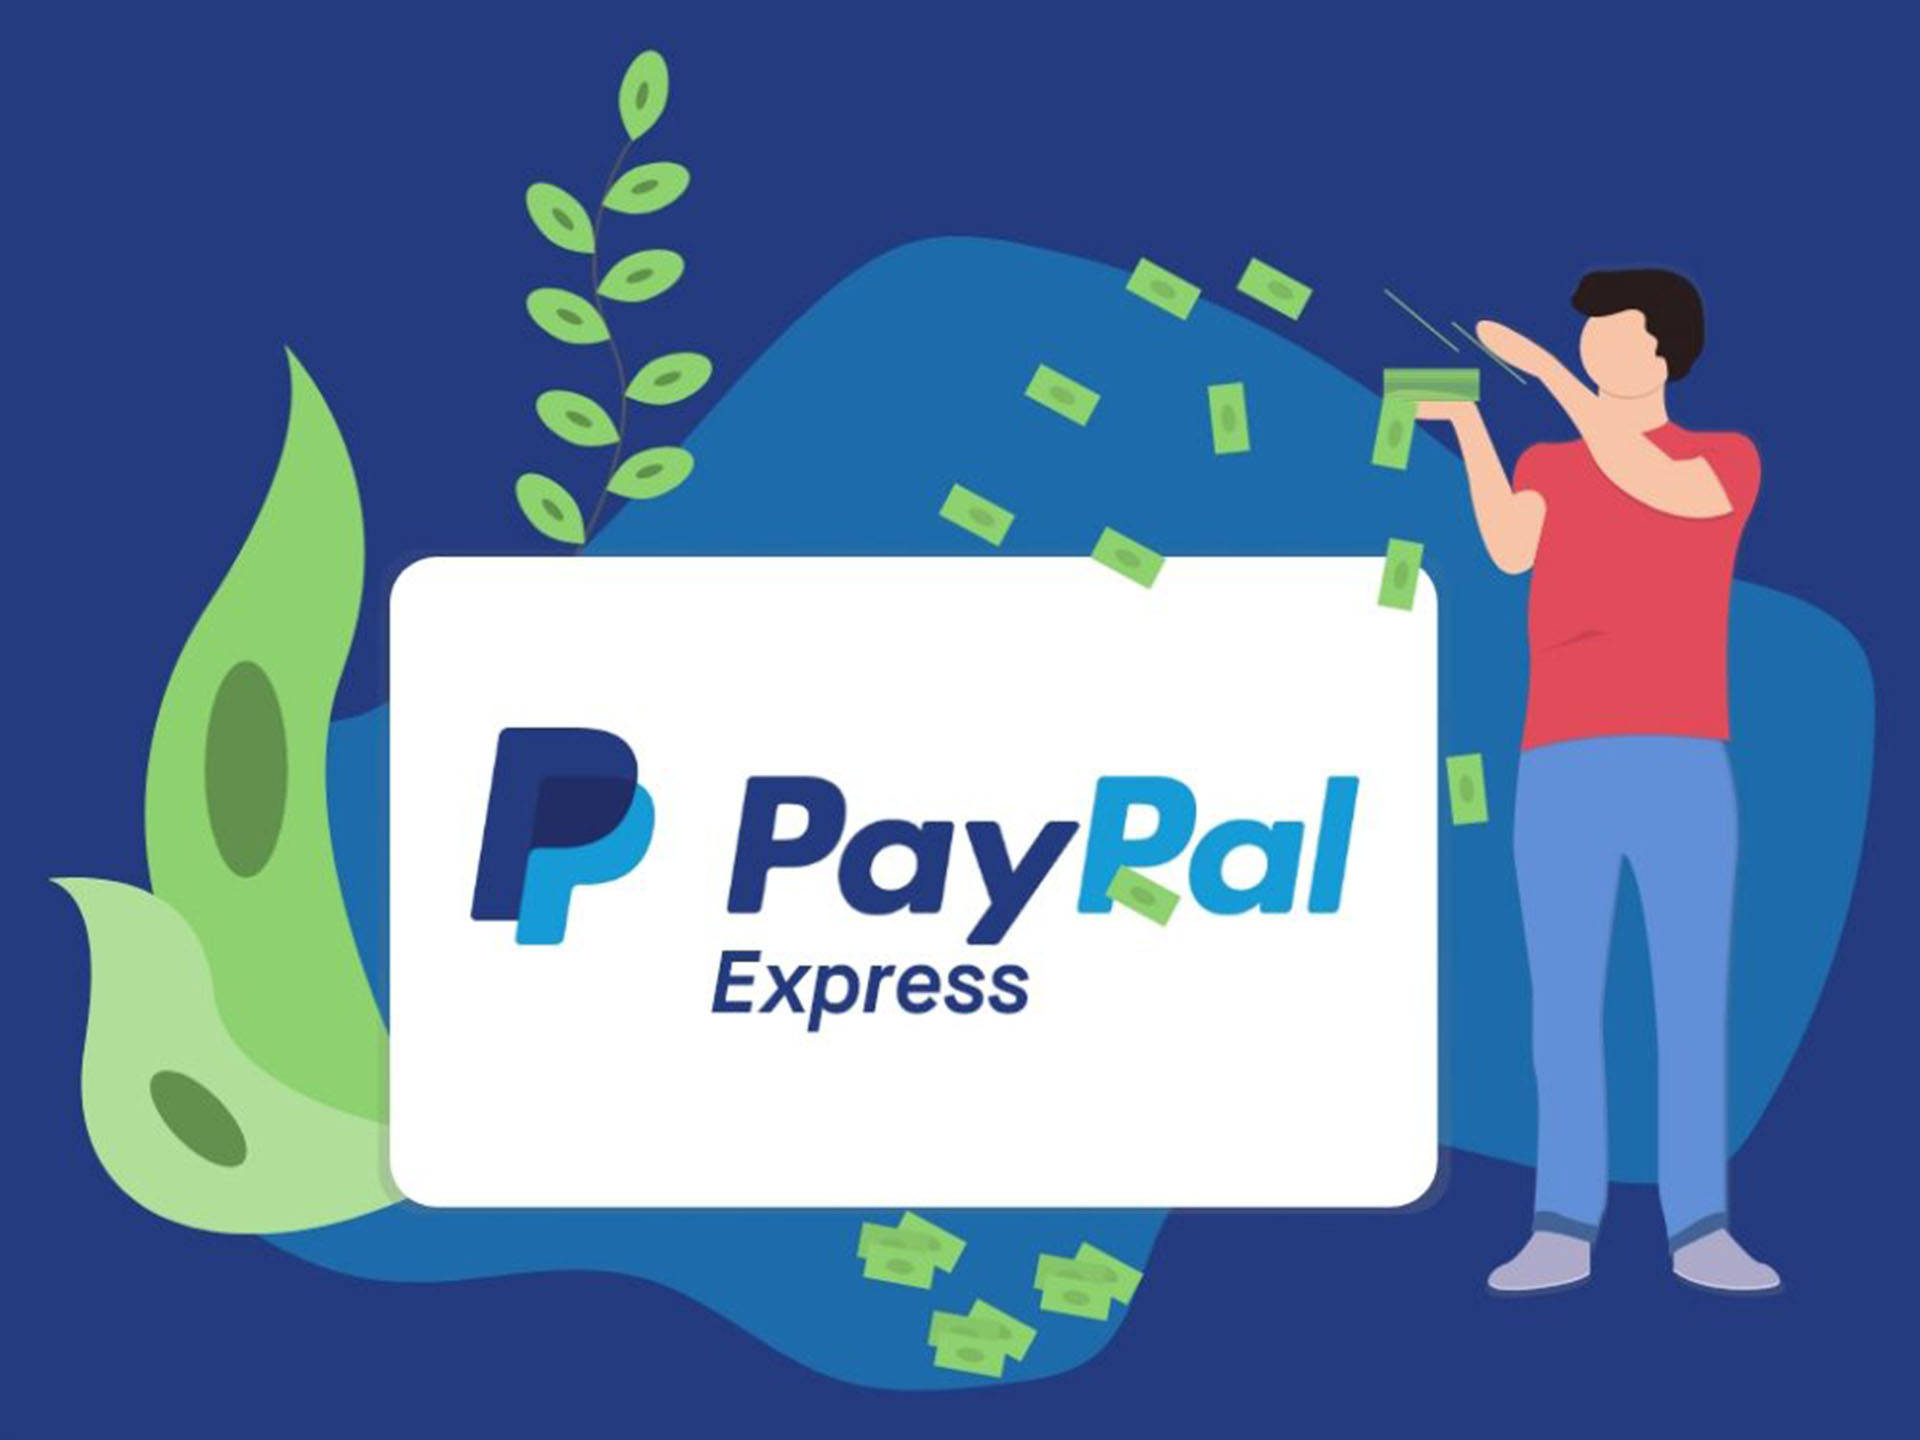 Paypal Express Illustration Background